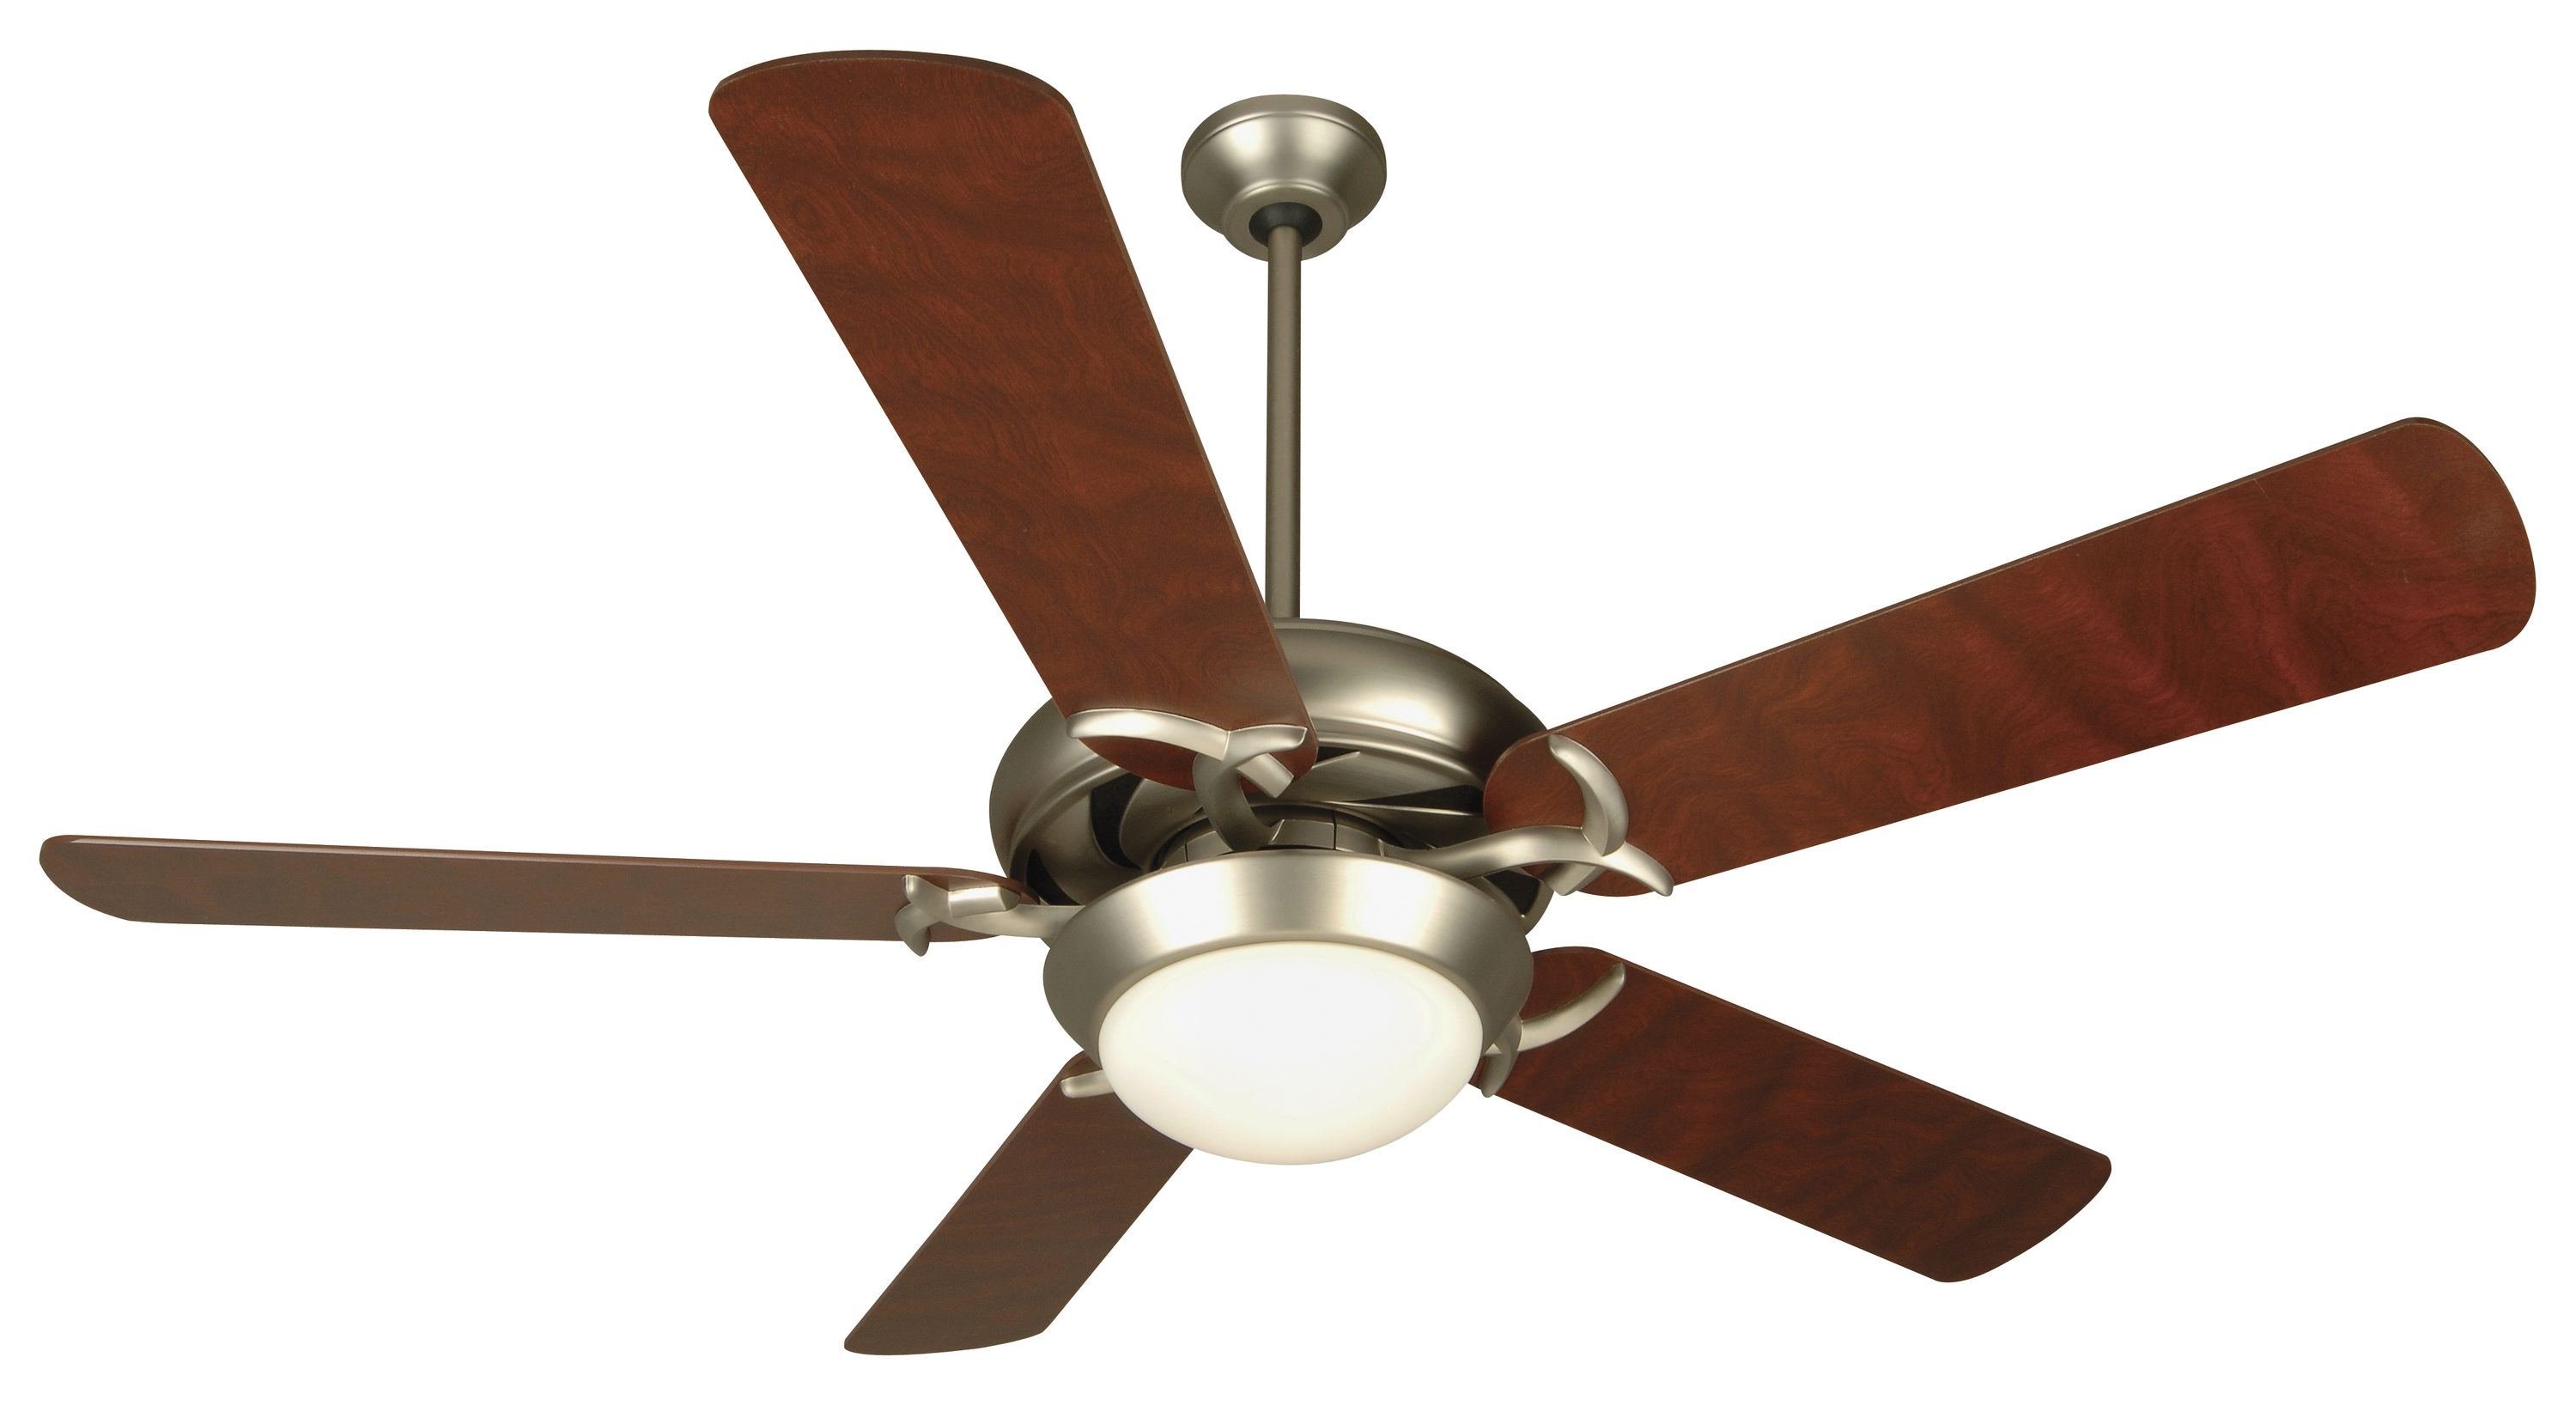 Ceiling Fans Pack in Props - UE Marketplace